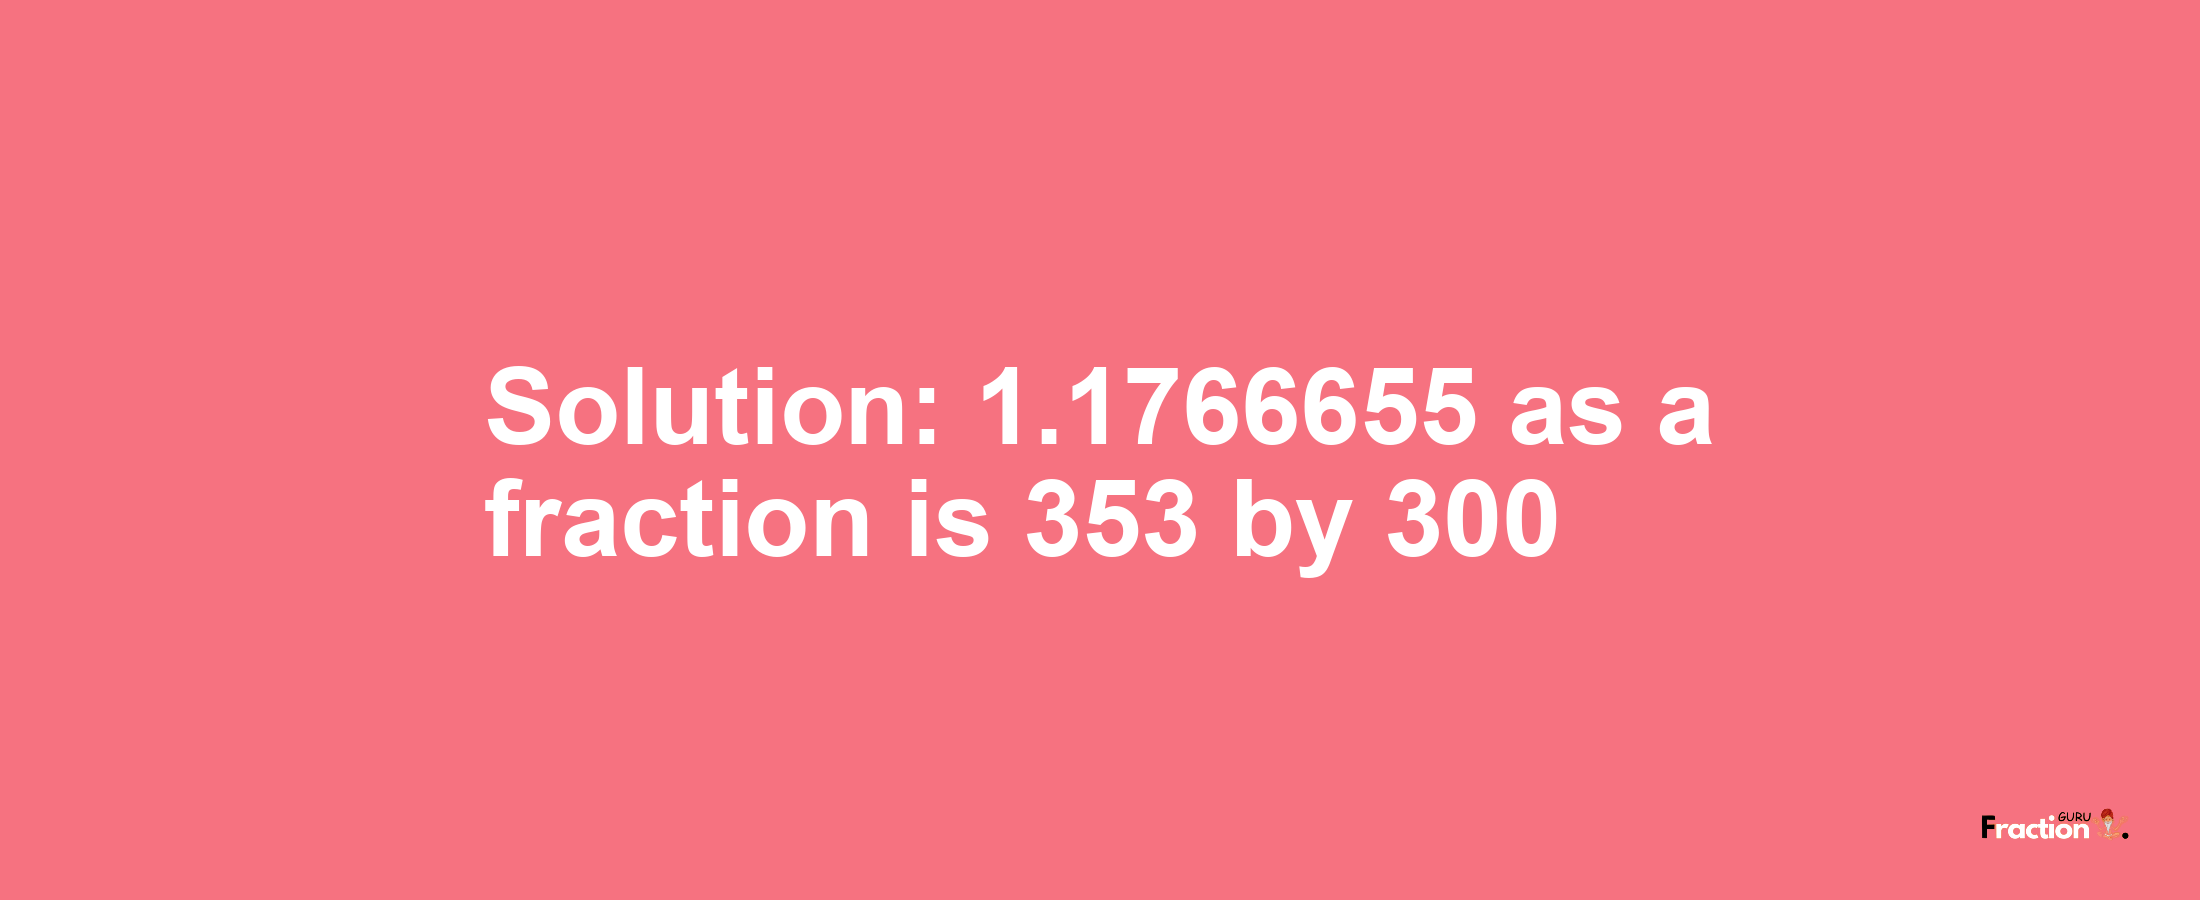 Solution:1.1766655 as a fraction is 353/300